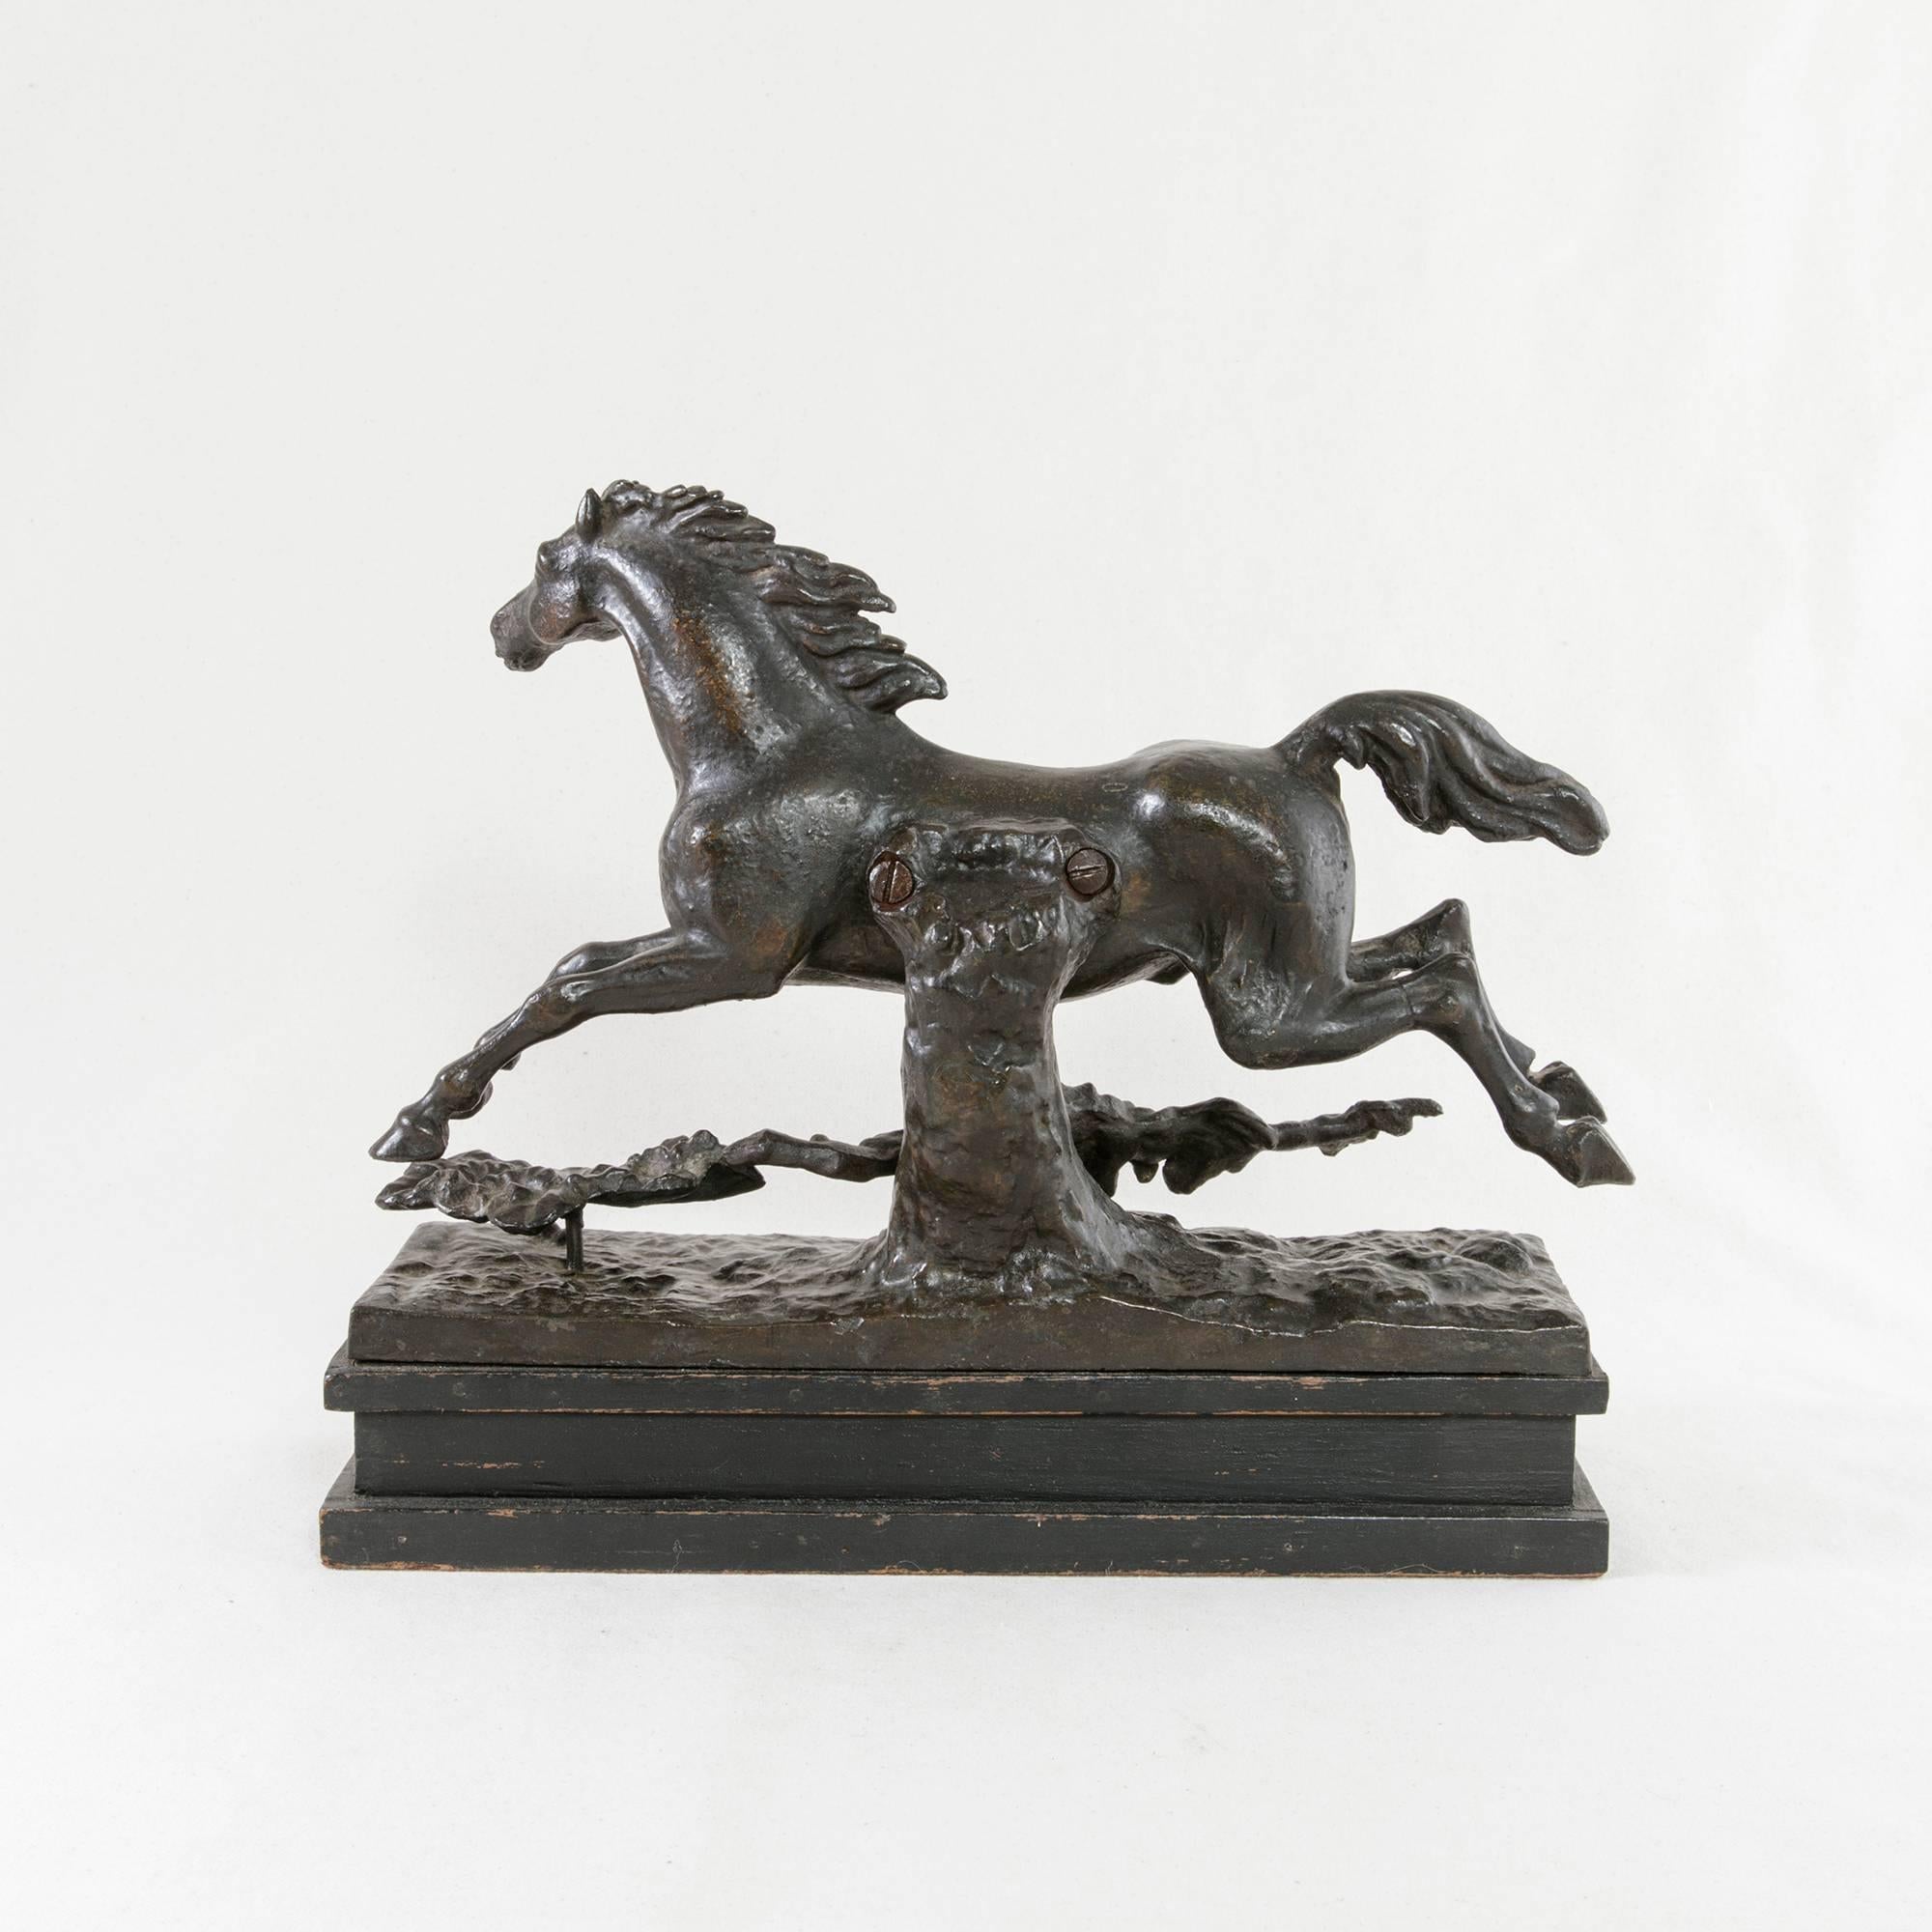 Bronze 19th Century French Napoleon III Period Cast Iron Horse Sculpture on Wooden Base